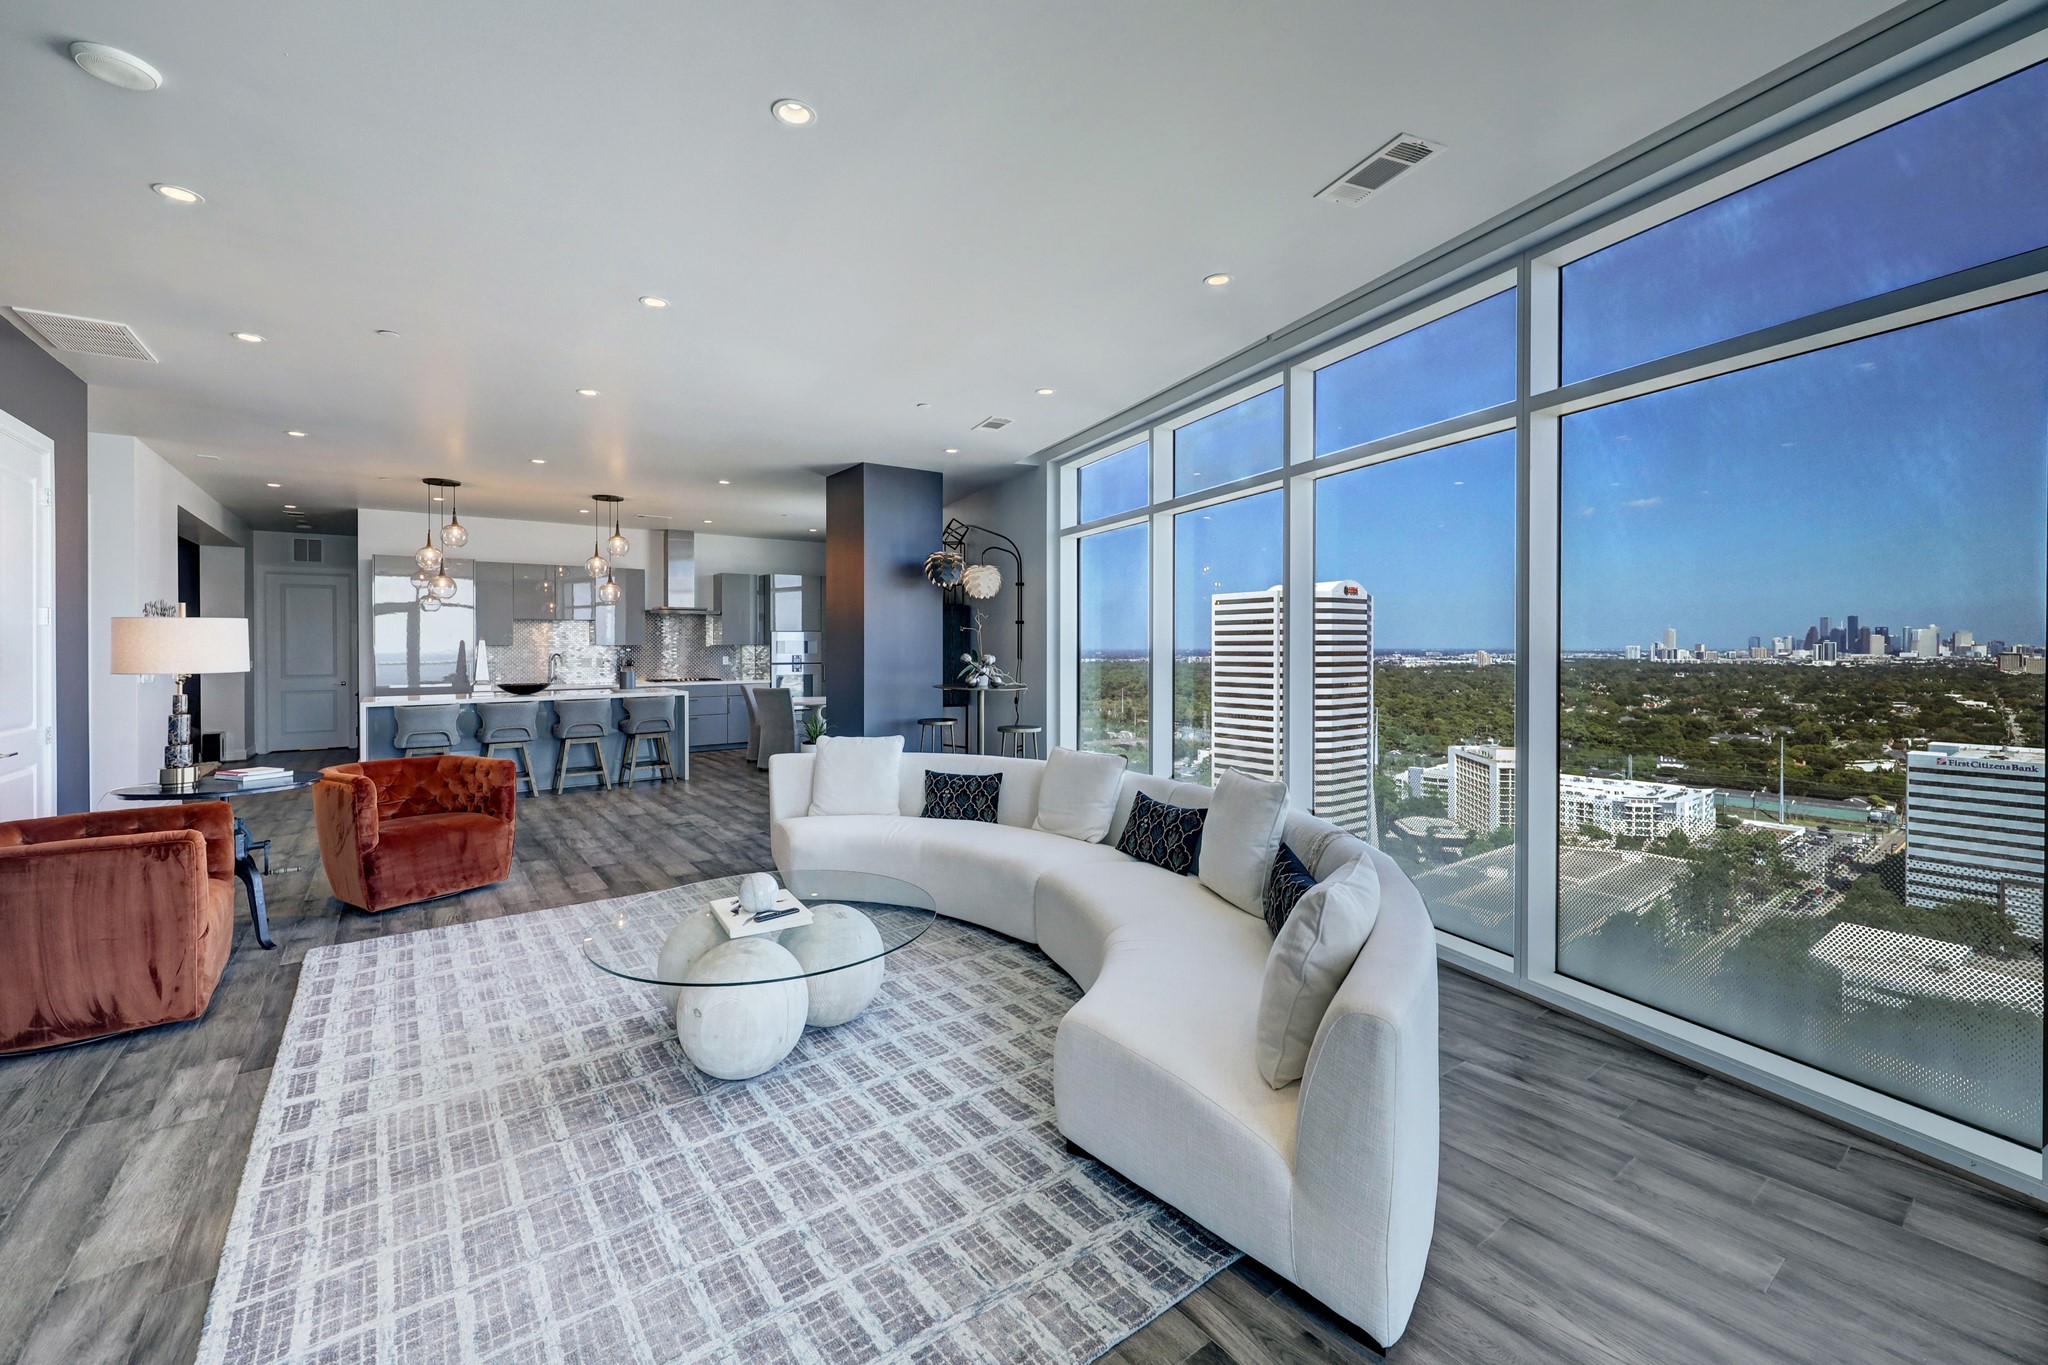 Beautiful open concept with breathtaking views from the 26th floor